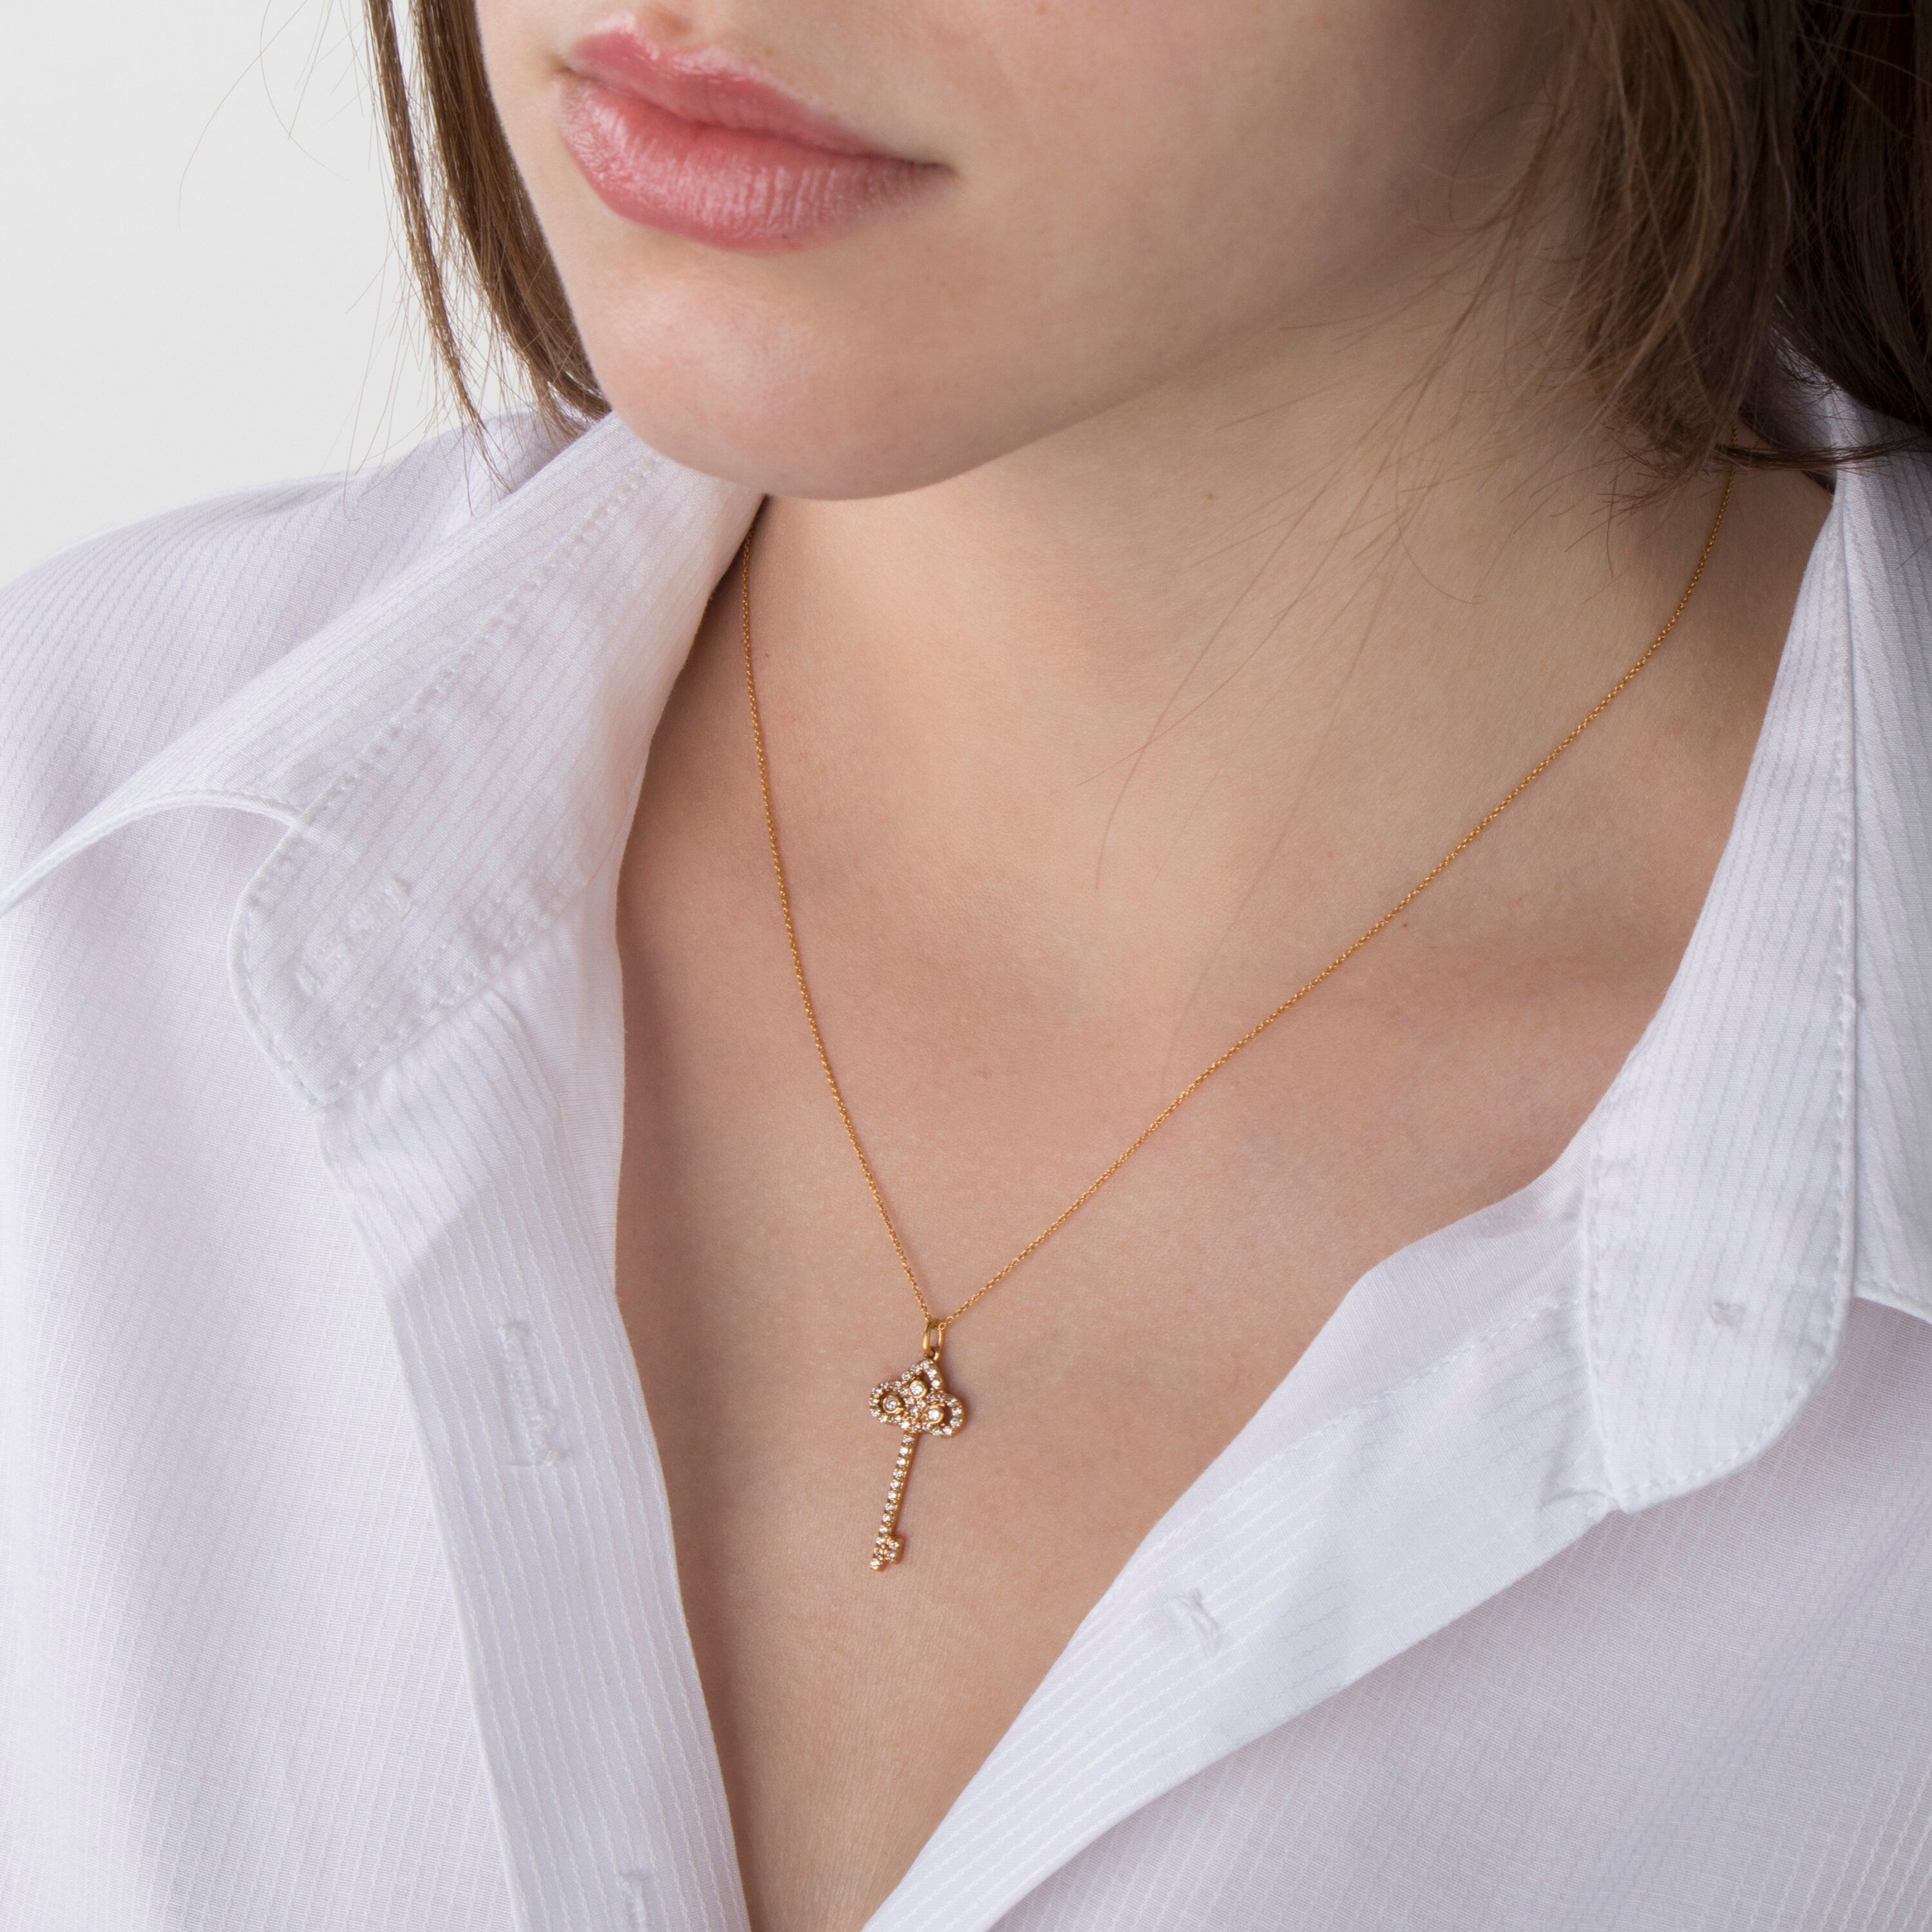 Diamond Key Pendant Necklace Available in 14K and 18K Gold